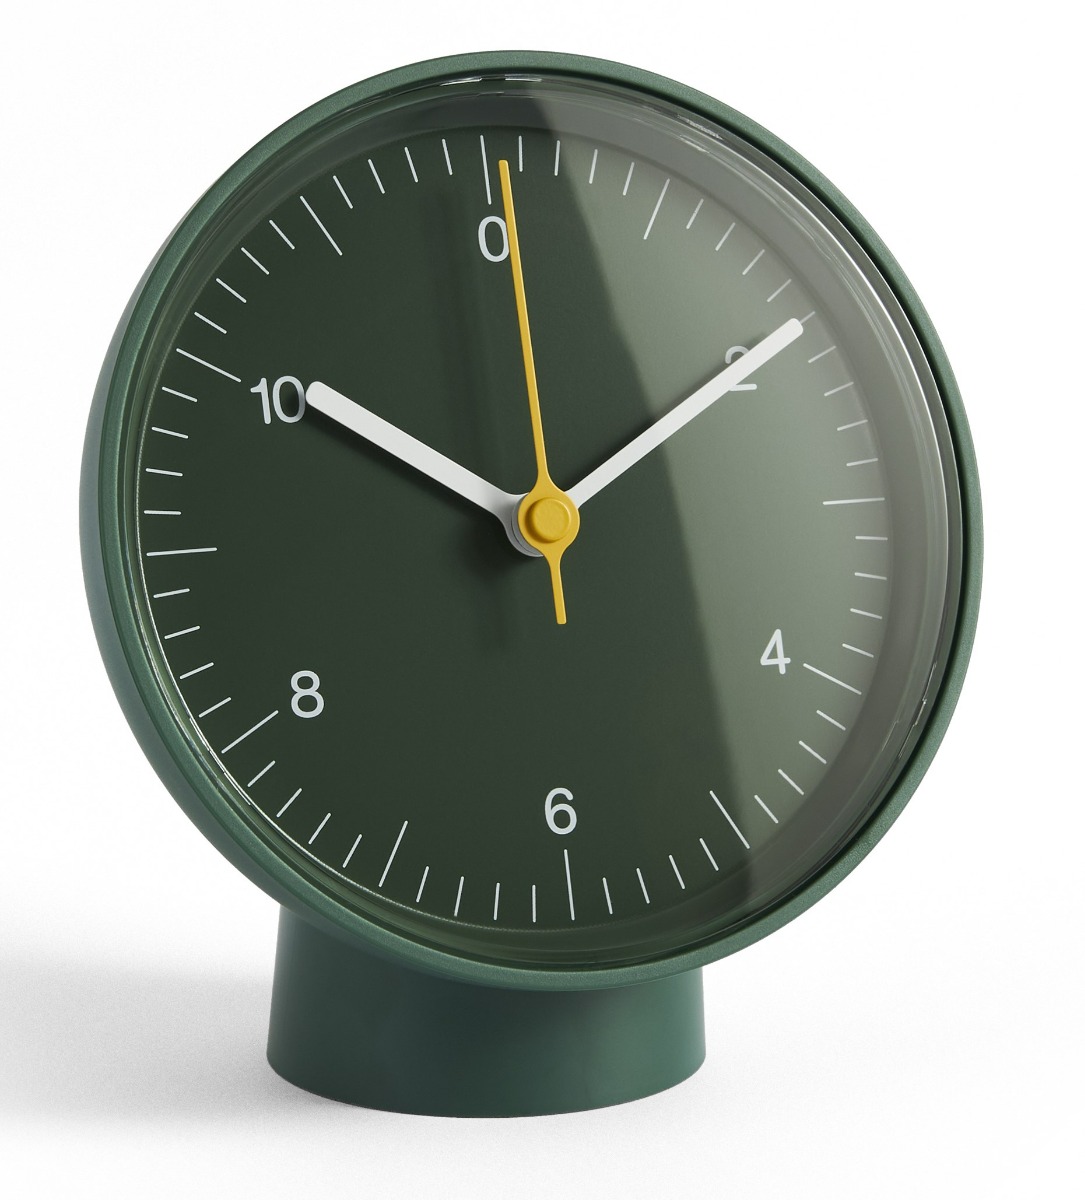 https://www.fundesign.nl/media/catalog/product/a/b/ab311-a587_table_clock_green.jpg